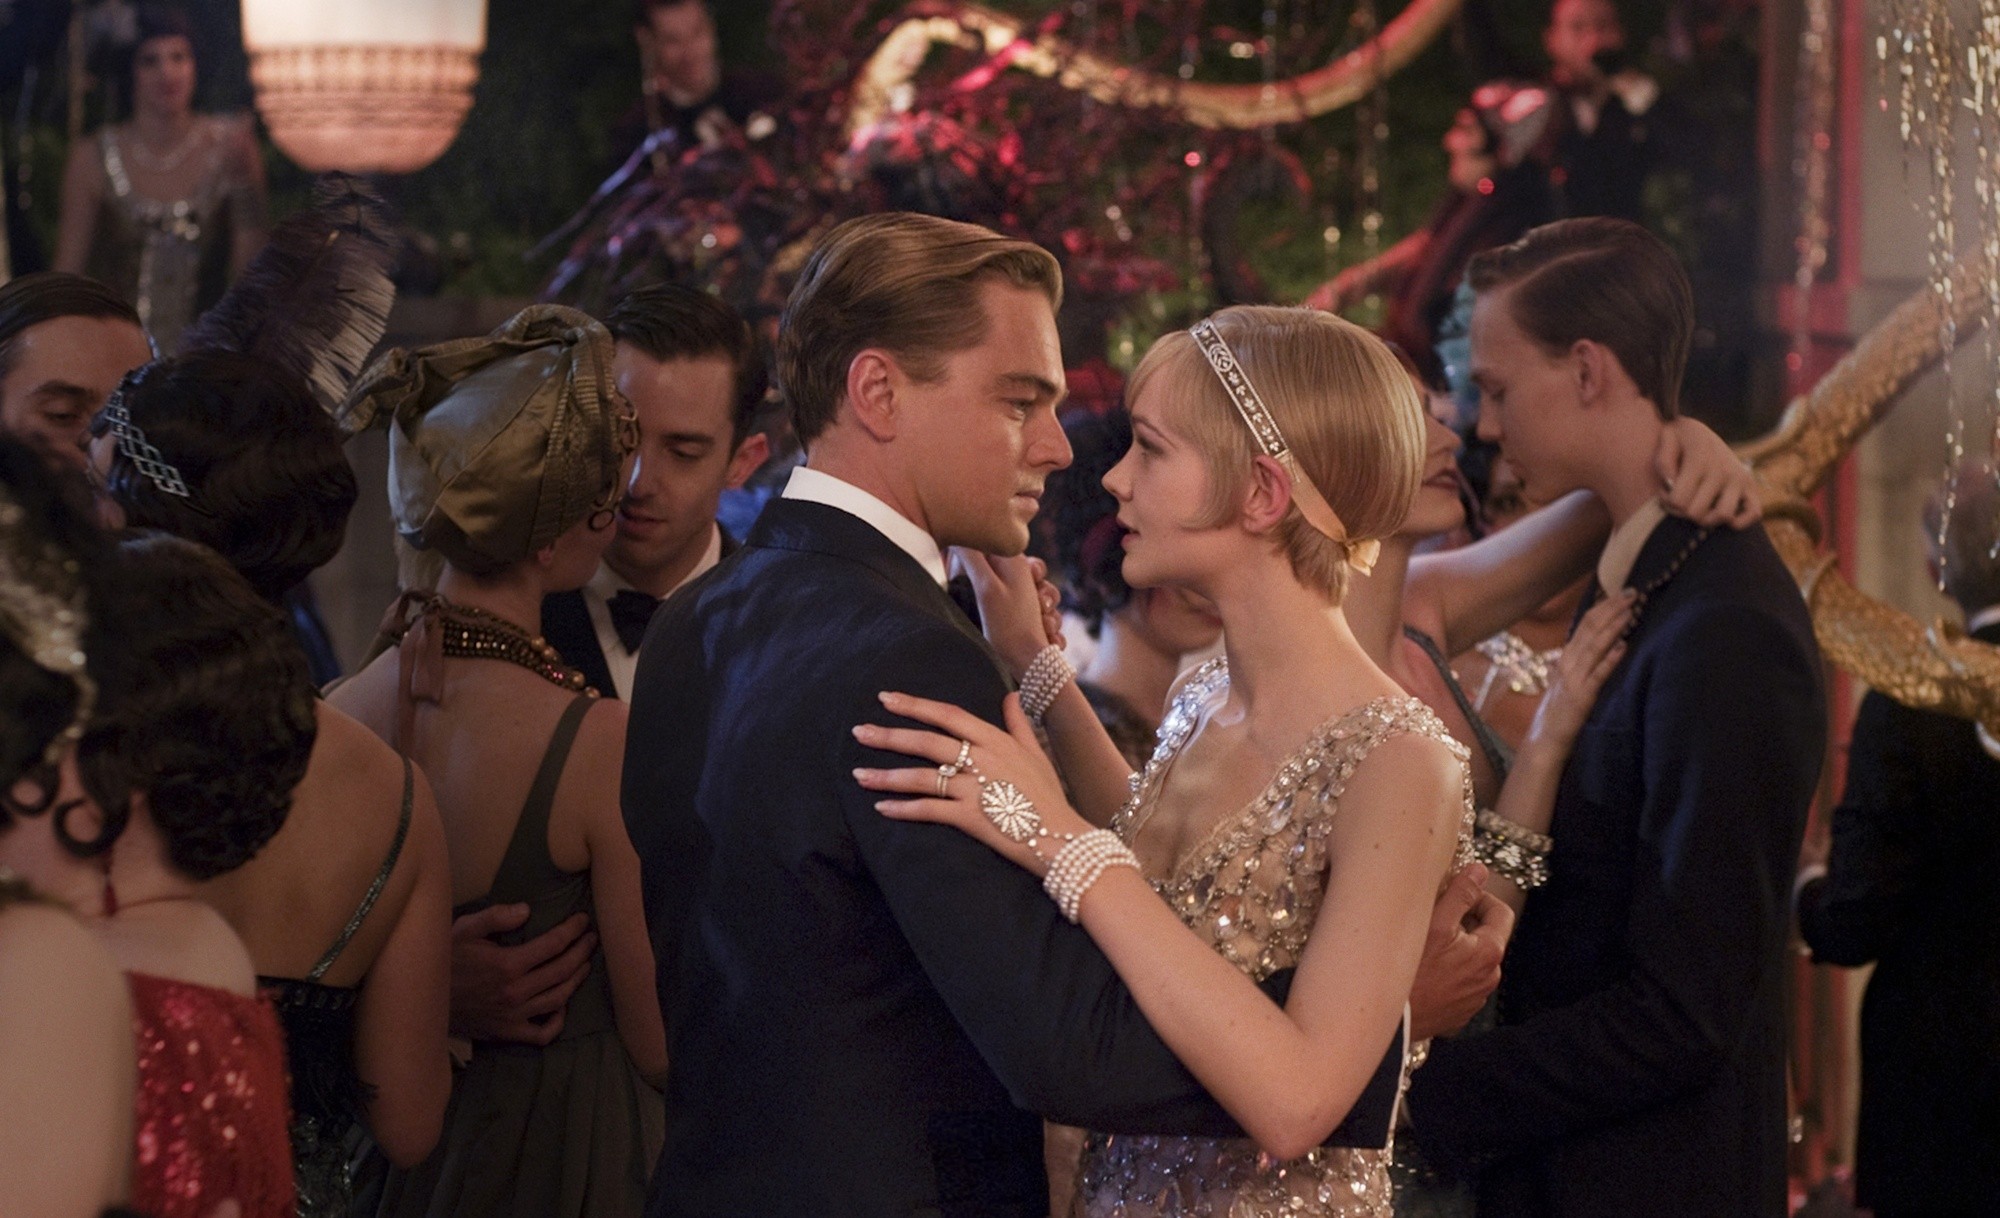 Leonardo DiCaprio stars as Jay Gatsby and Carey Mulligan stars as Daisy Buchanan in Warner Bros. Pictures' The Great Gatsby (2013)